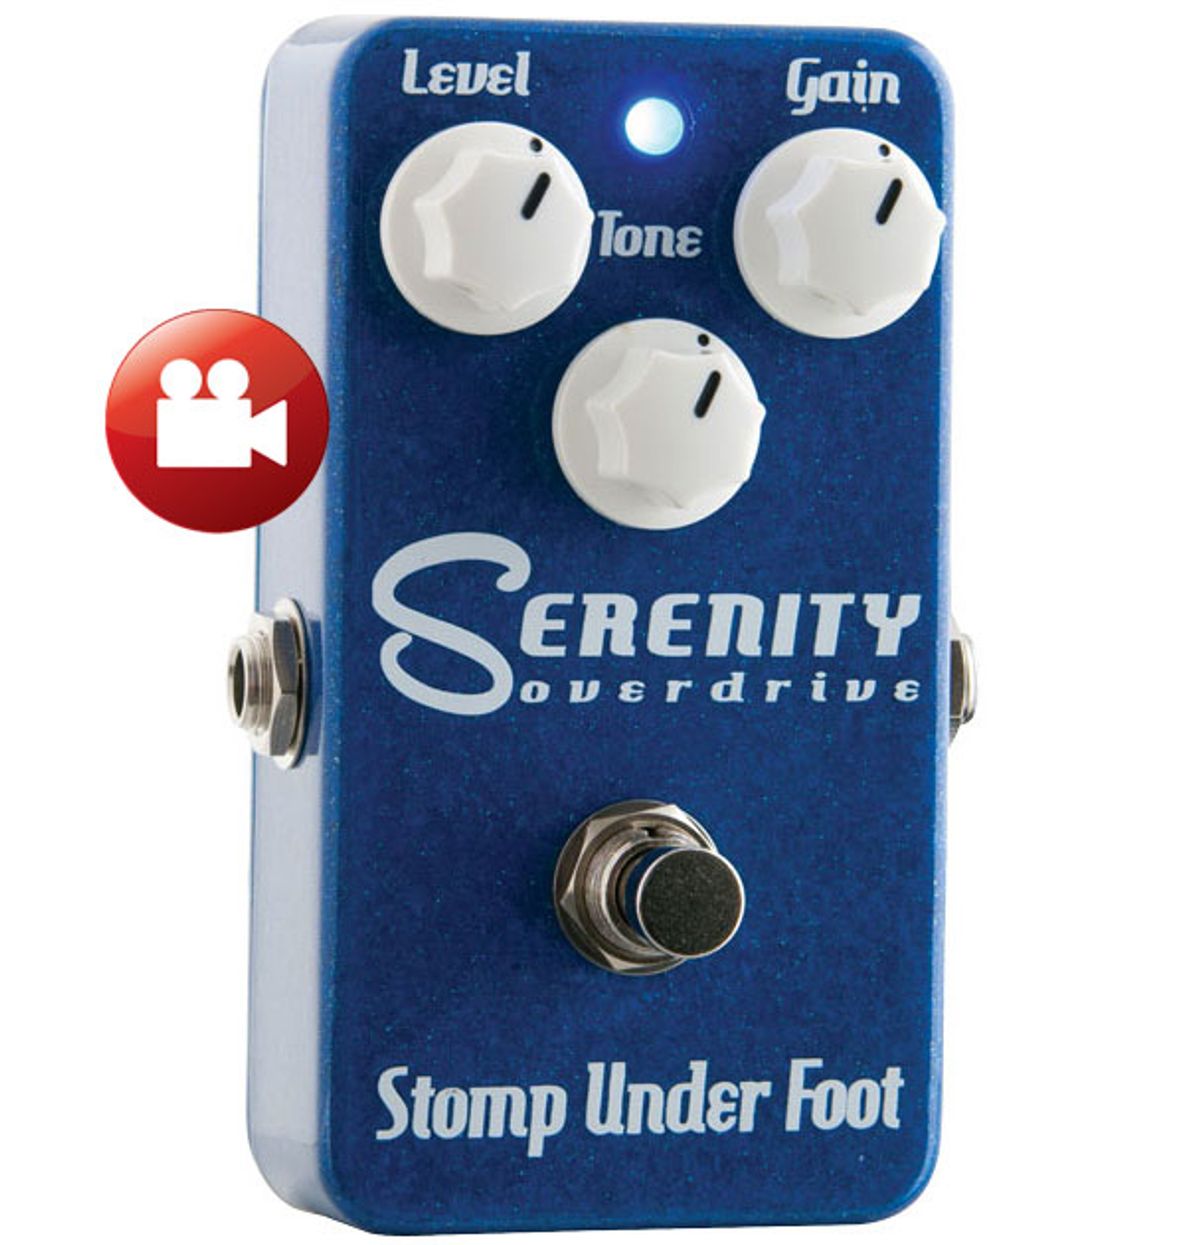 Stomp Under Foot Serenity Overdrive Review